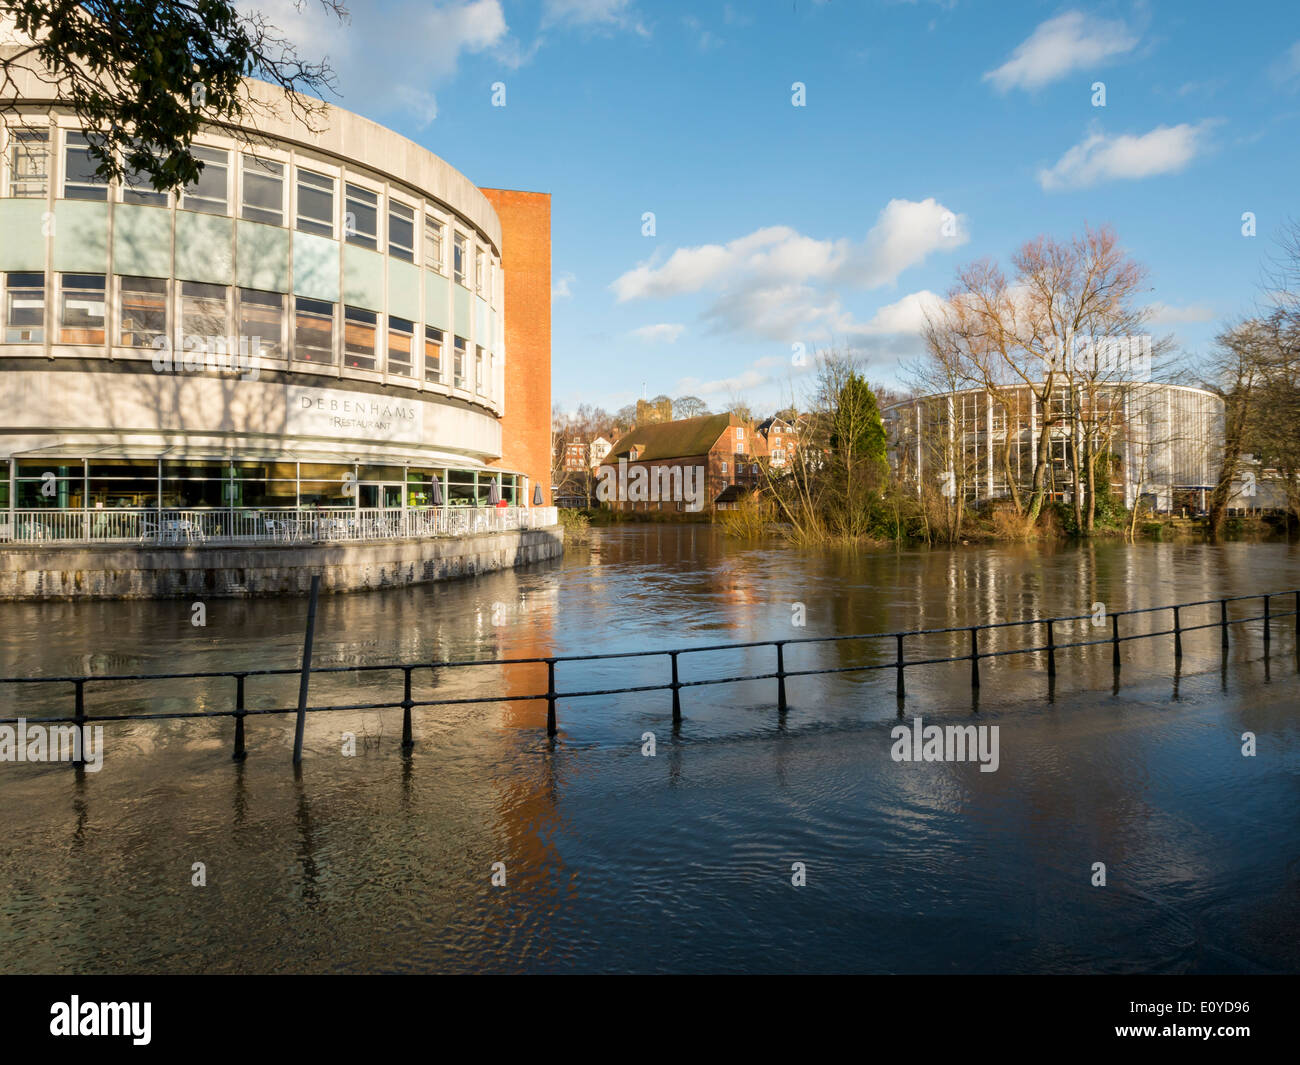 europe, UK, England, Surrey, Guildford, River Wey flooded Stock Photo